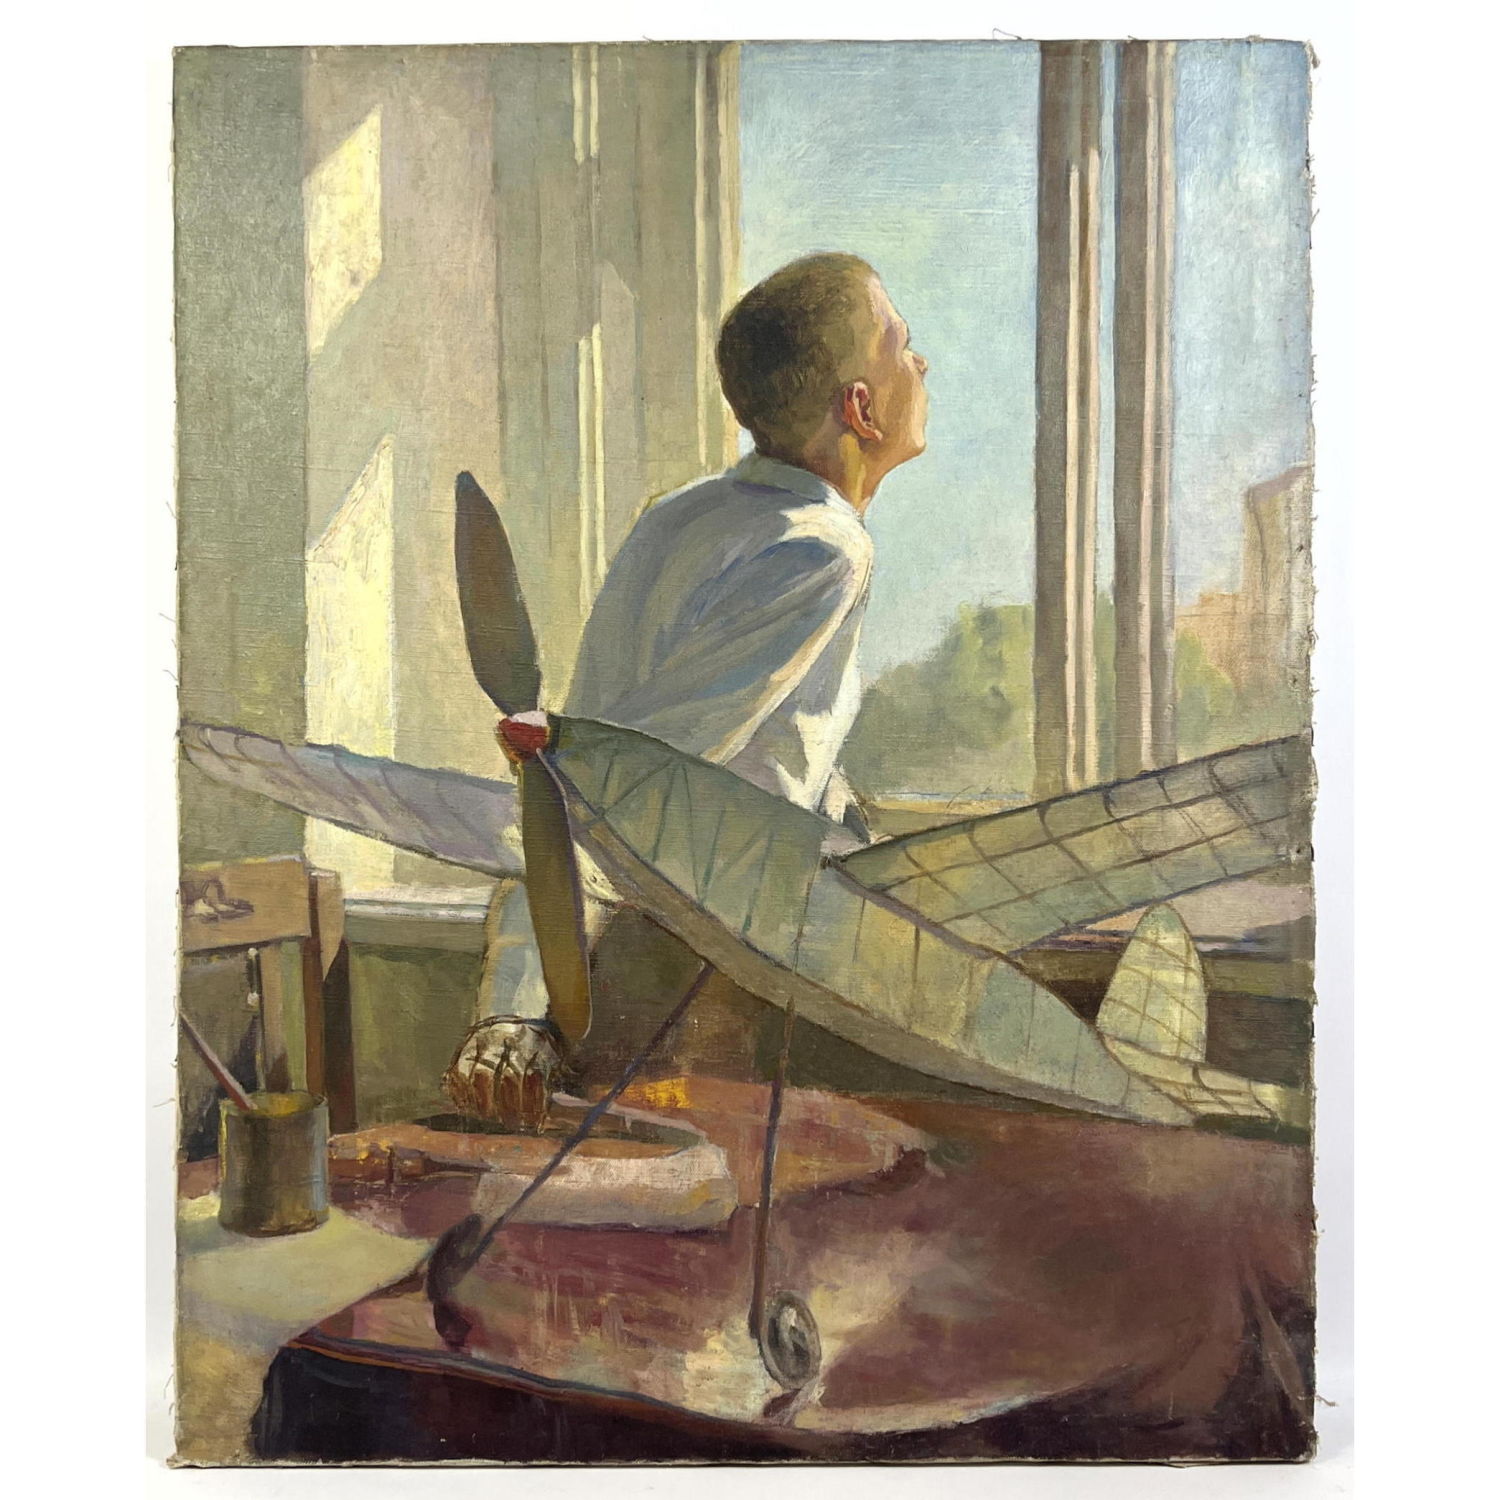 Painting on Canvas. Boy with Model